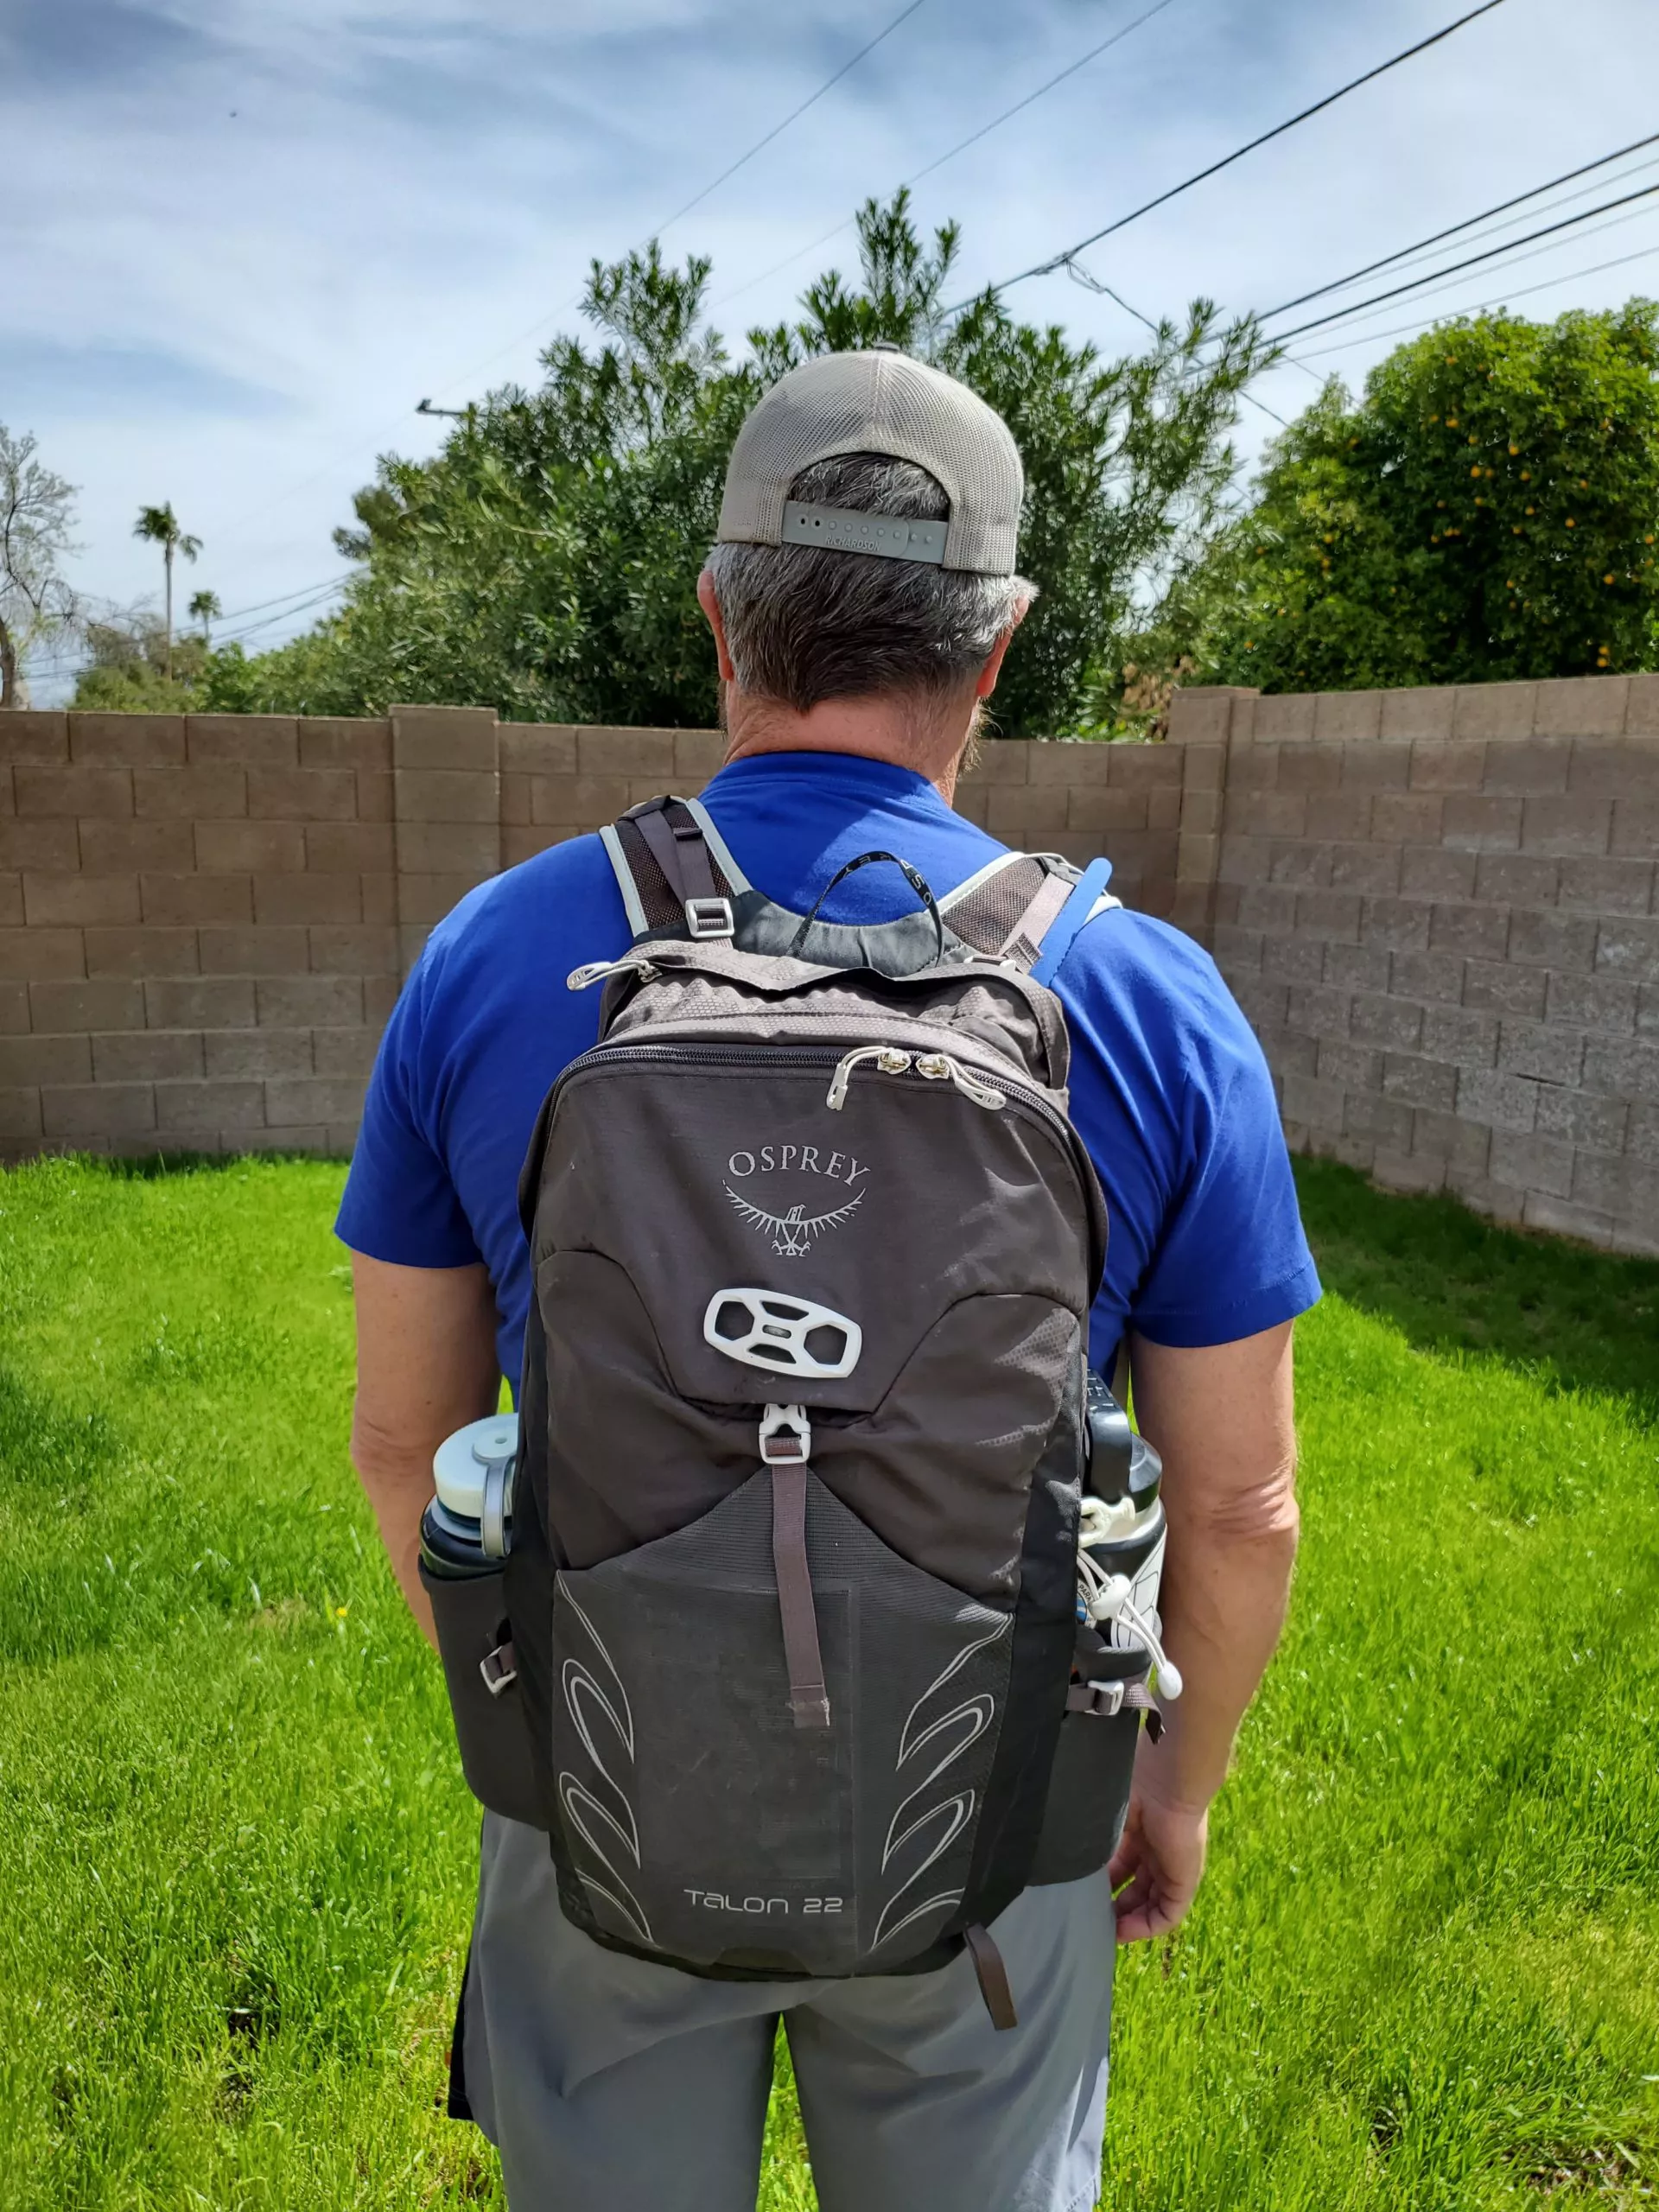 Osprey men's hiking and camping backpacks